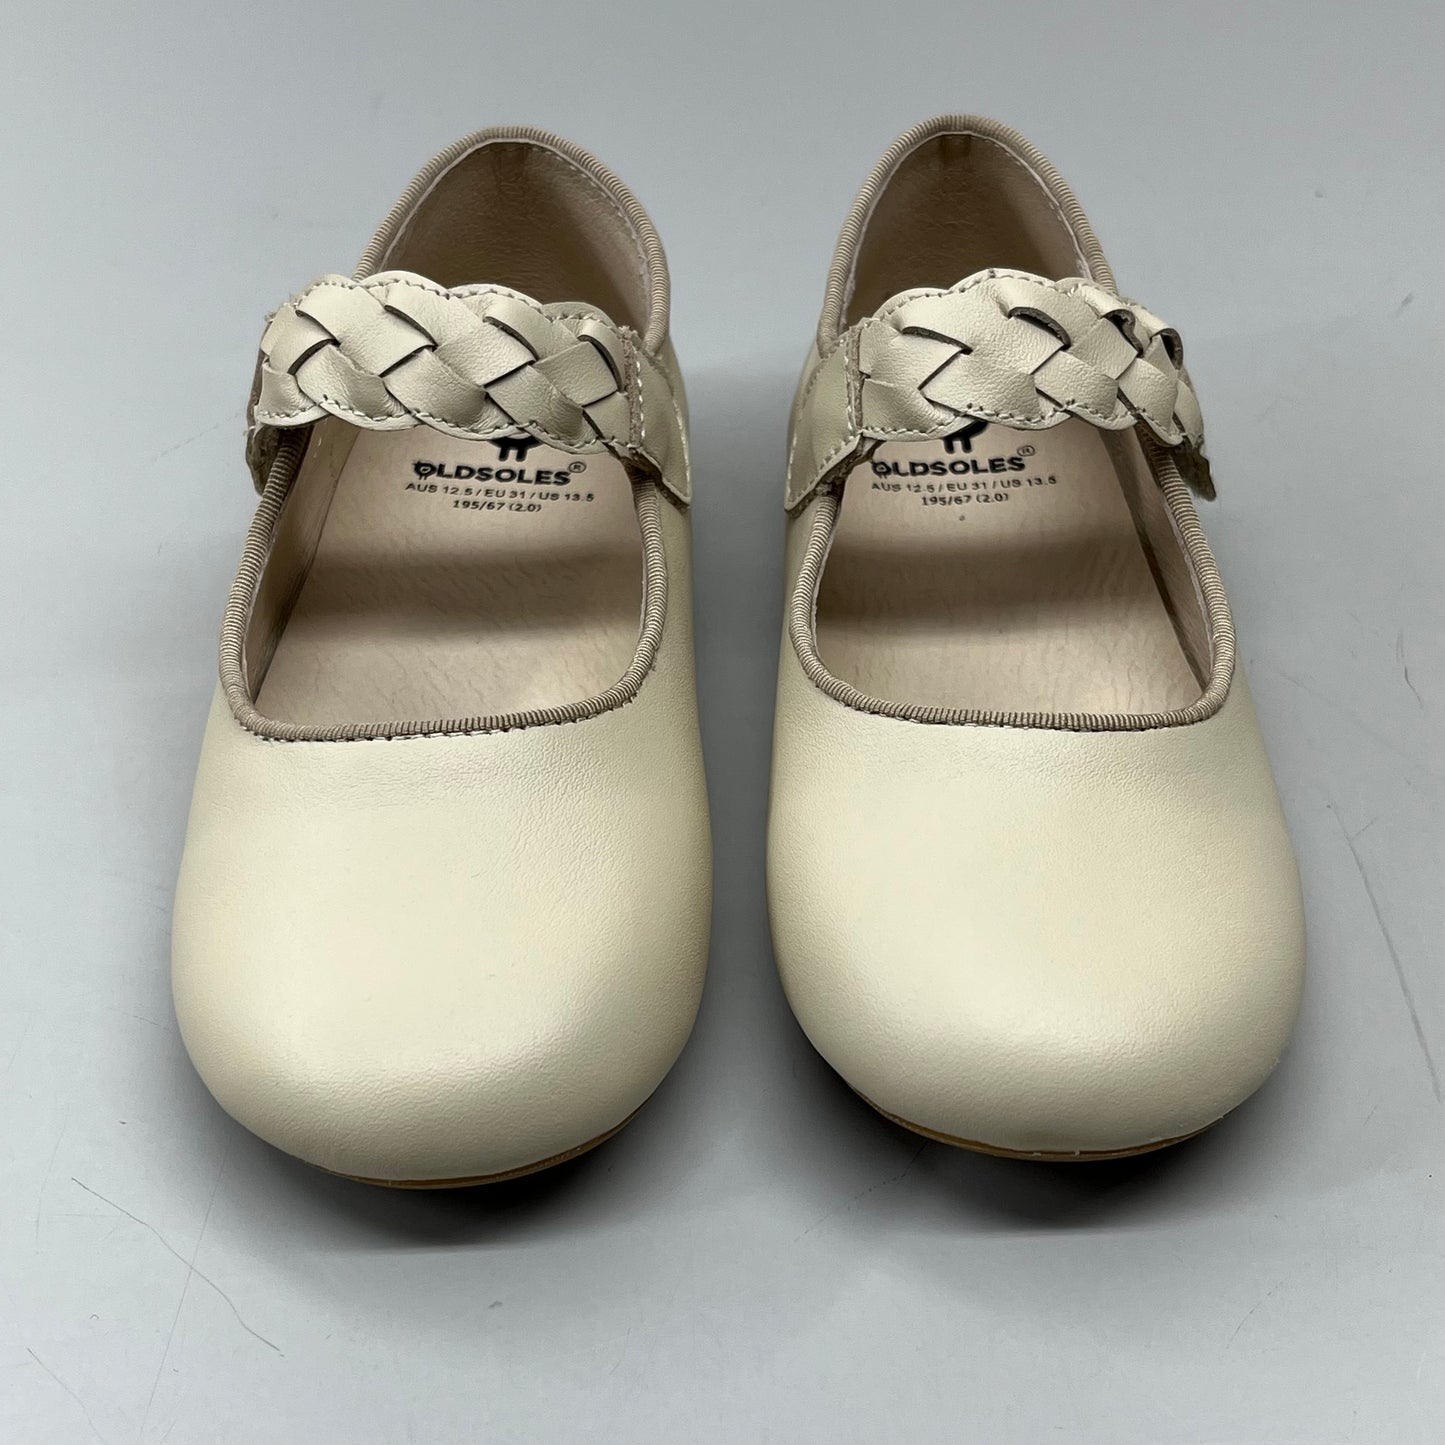 OLD SOLES Lady Plat Braided Strap Leather Shoe Kid’s Sz 31 US 13.5 Cream #817